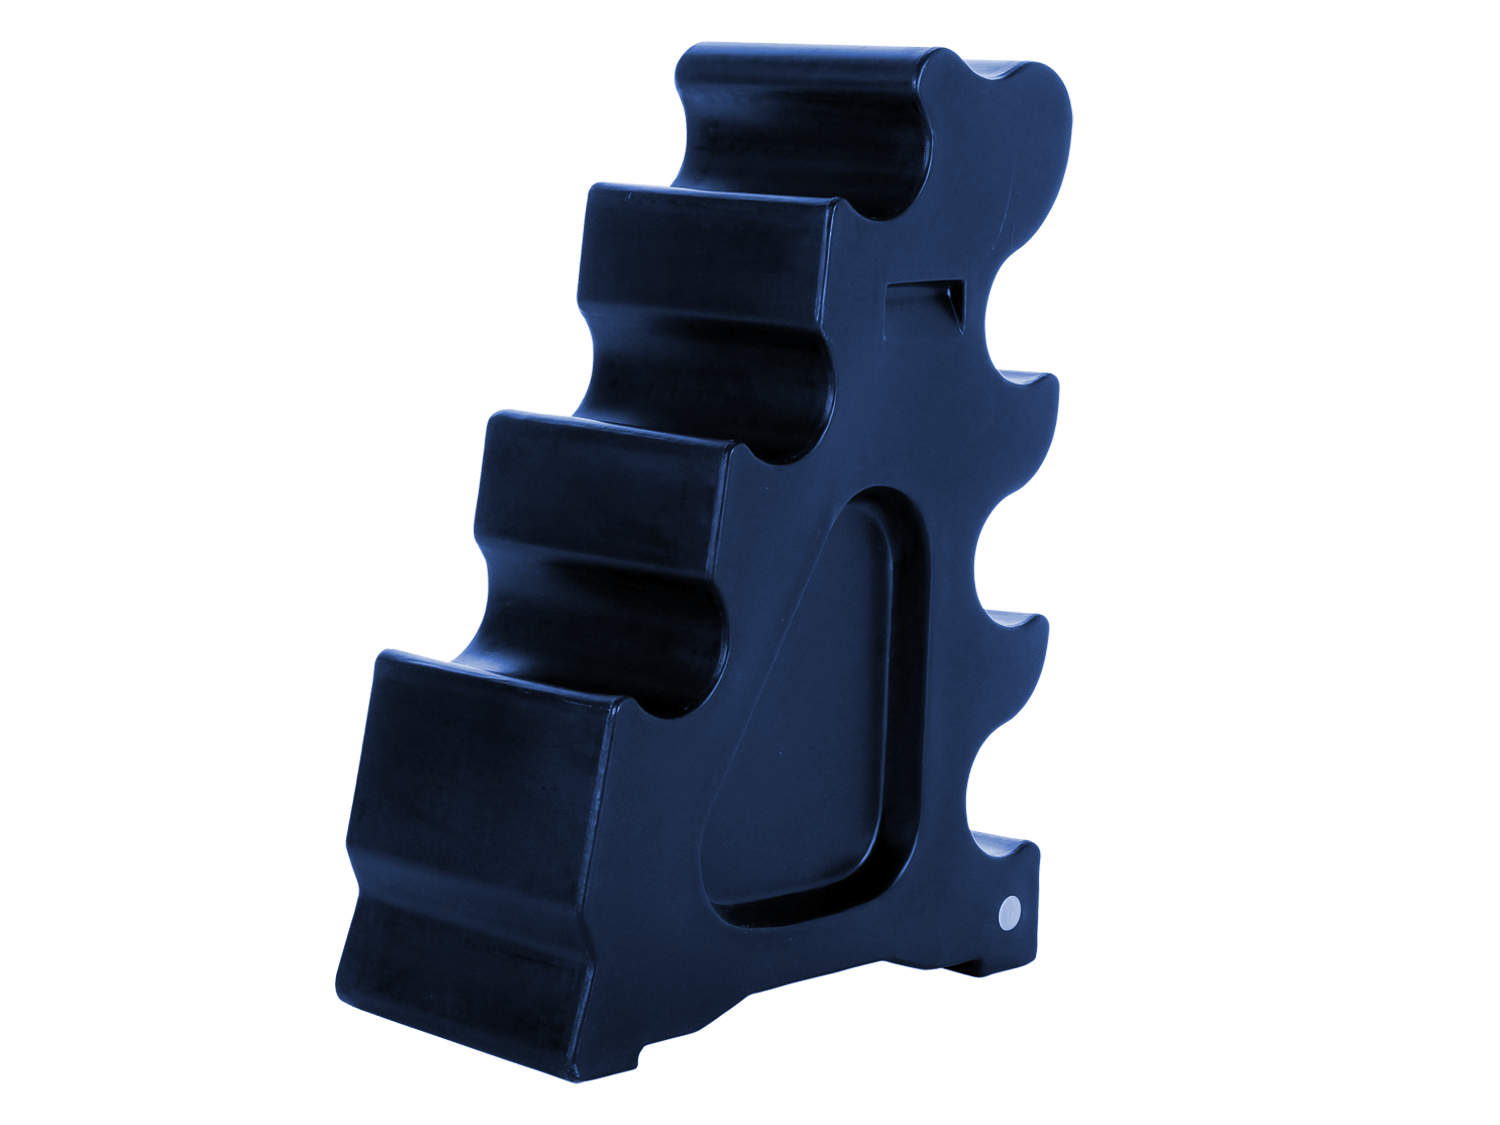 Classic Show Jumps Jump Blocks In the Navy Blue 3' Sloping Jump Block - Set of 2